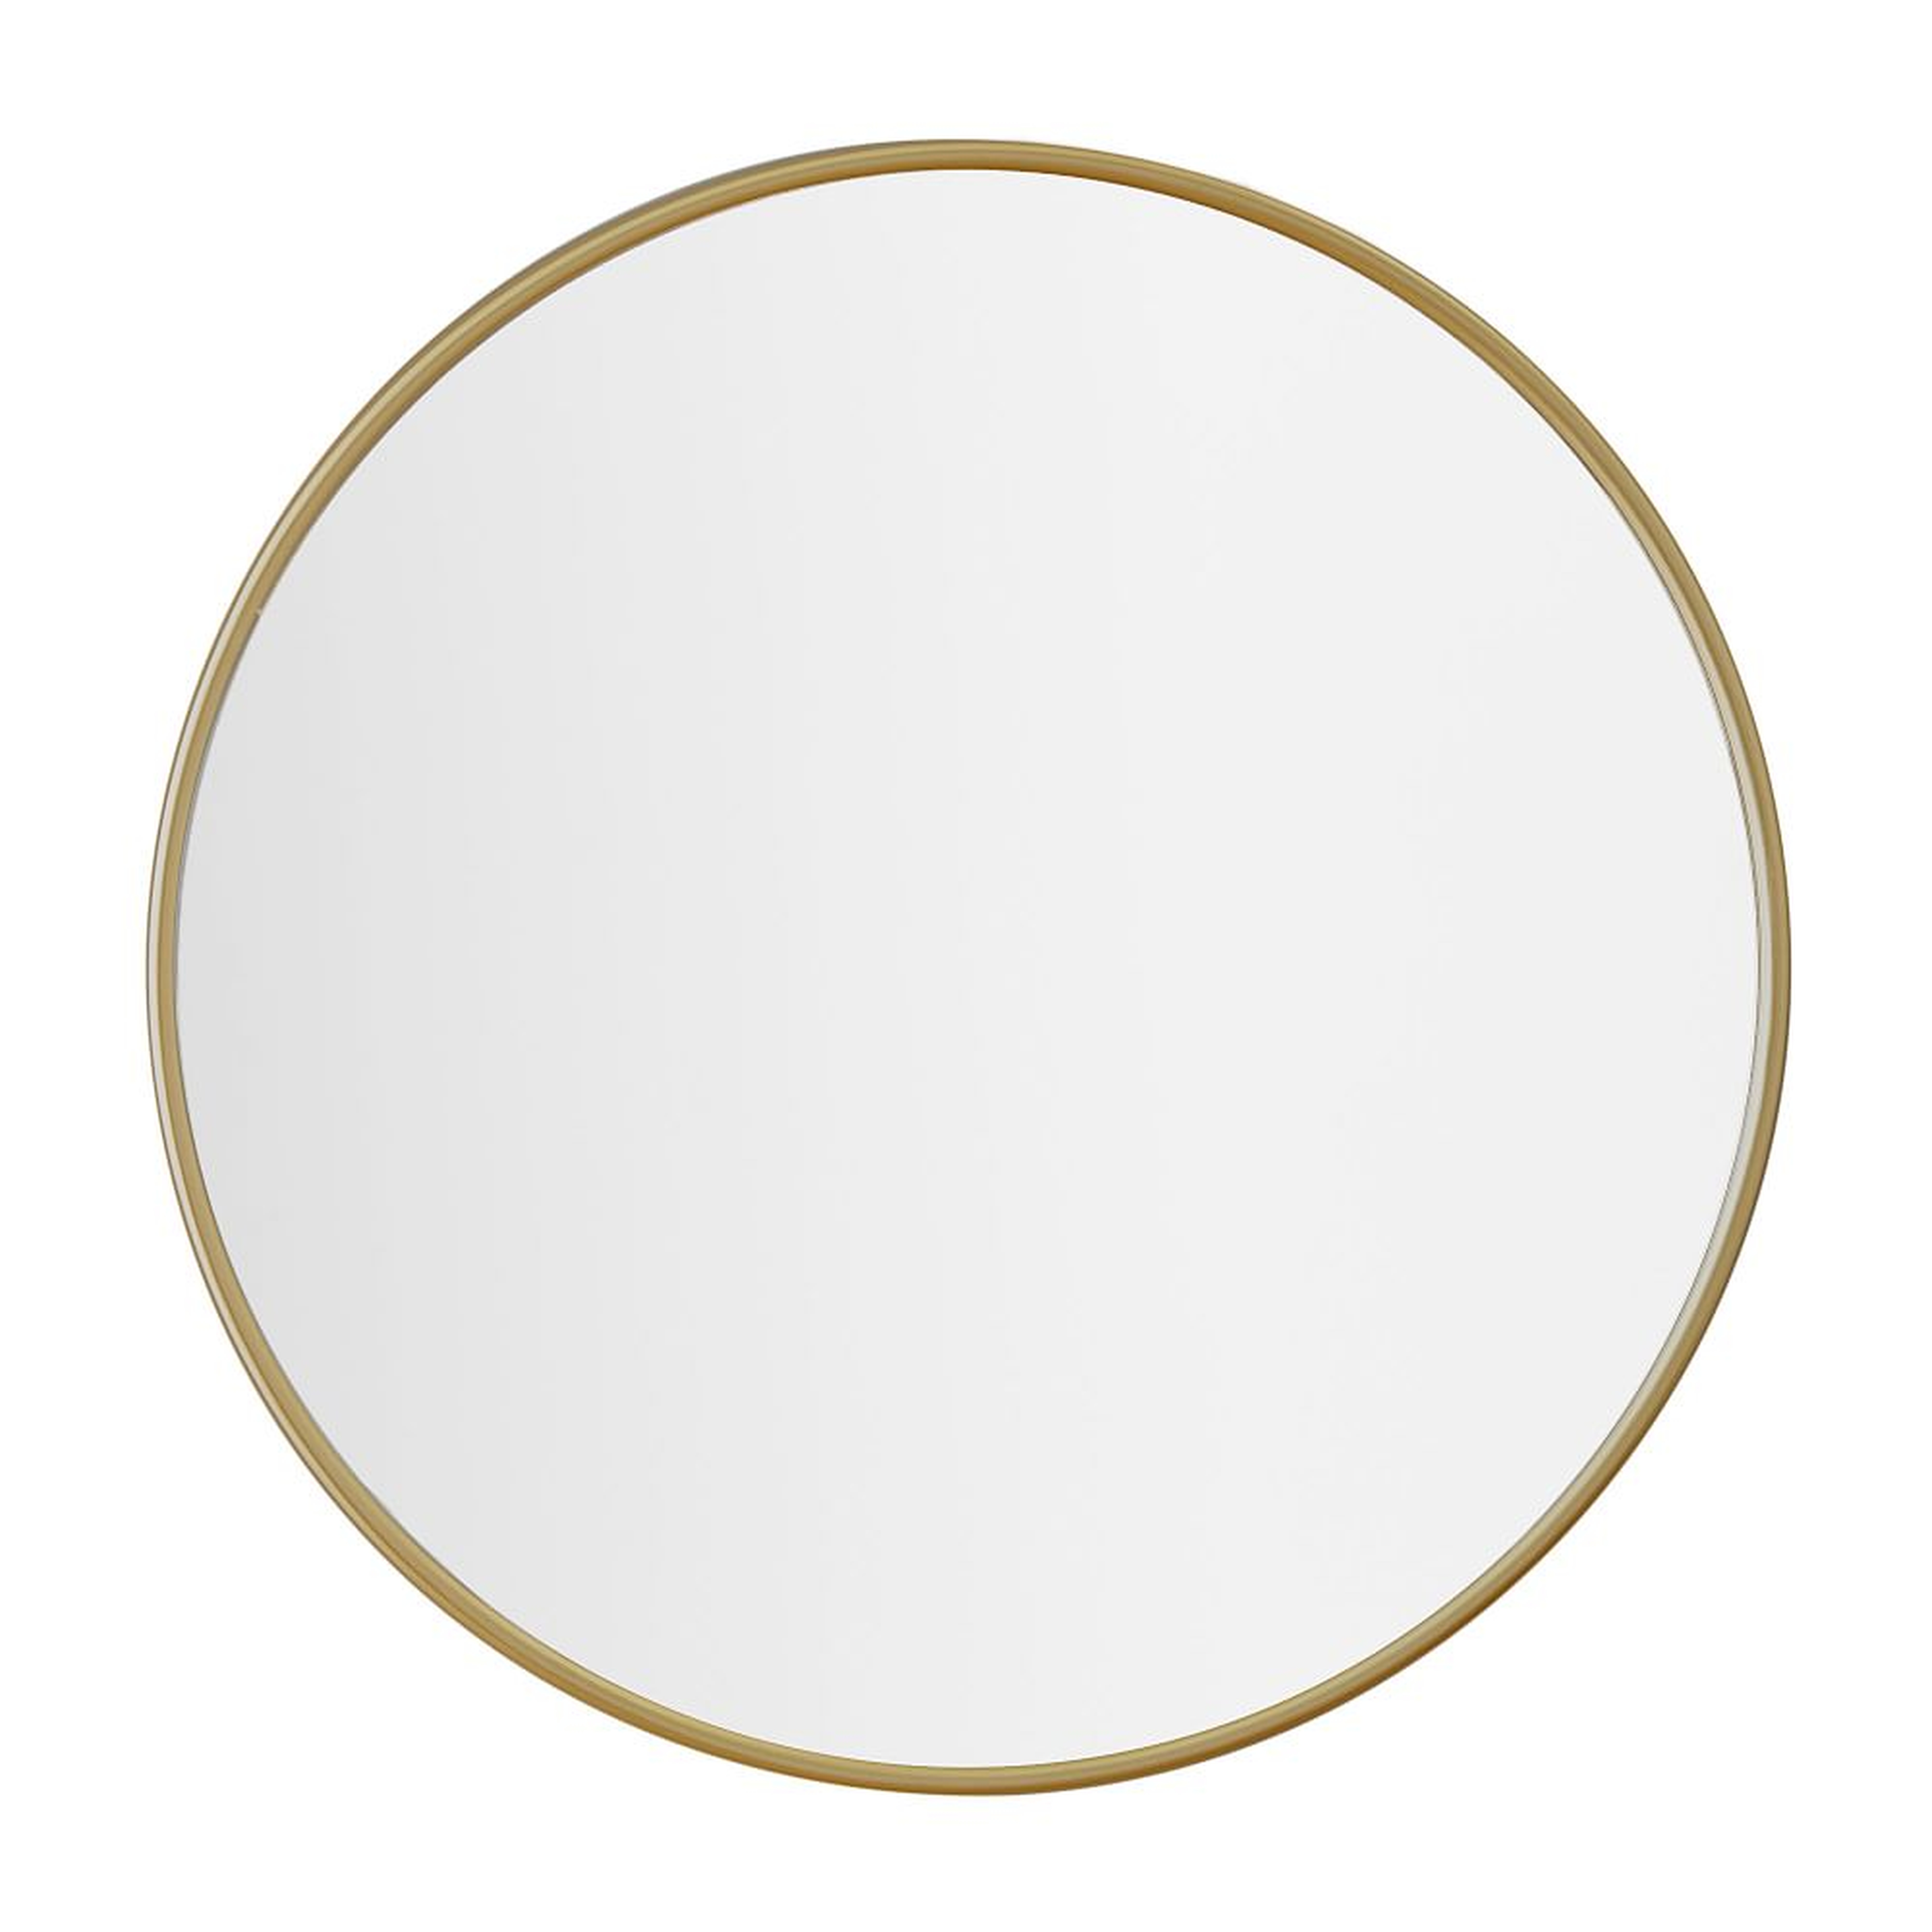 No Nails Metal Framed Mirror, Tuscan Gold, 24 In - Pottery Barn Teen